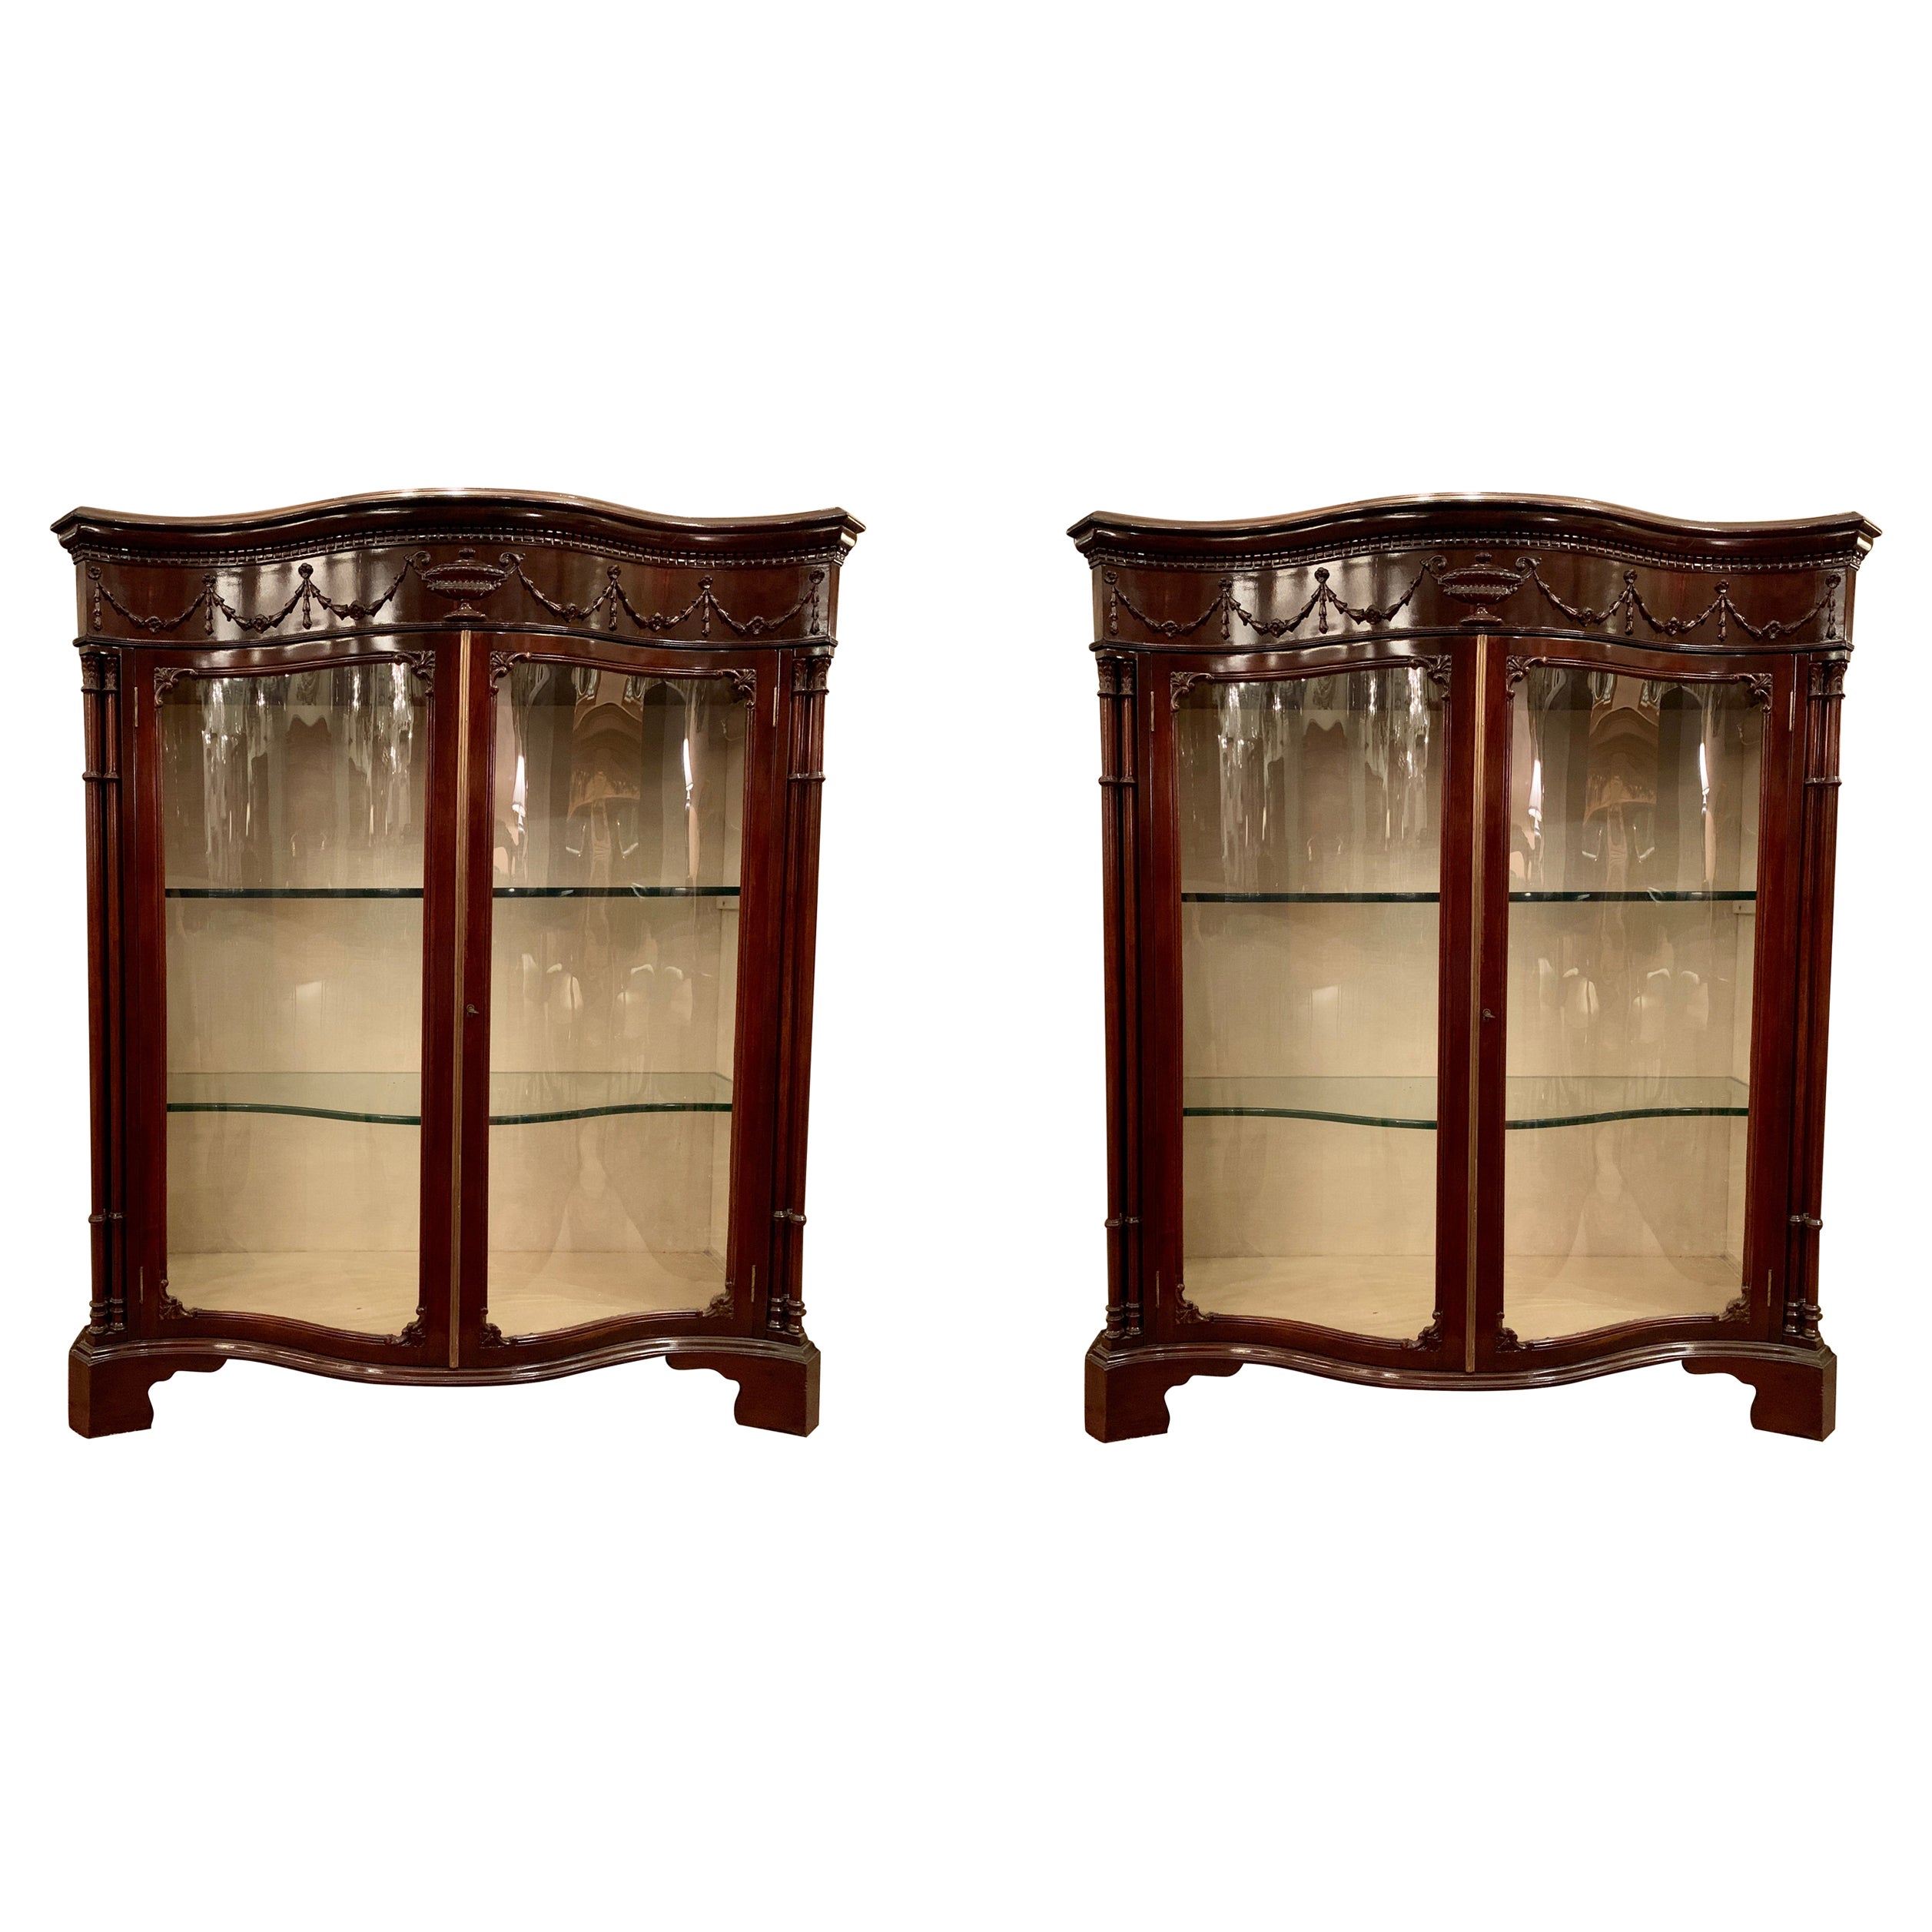 Pair Antique English Adams Style Glass-Front Serpentine Cabinets, Circa 1890 For Sale